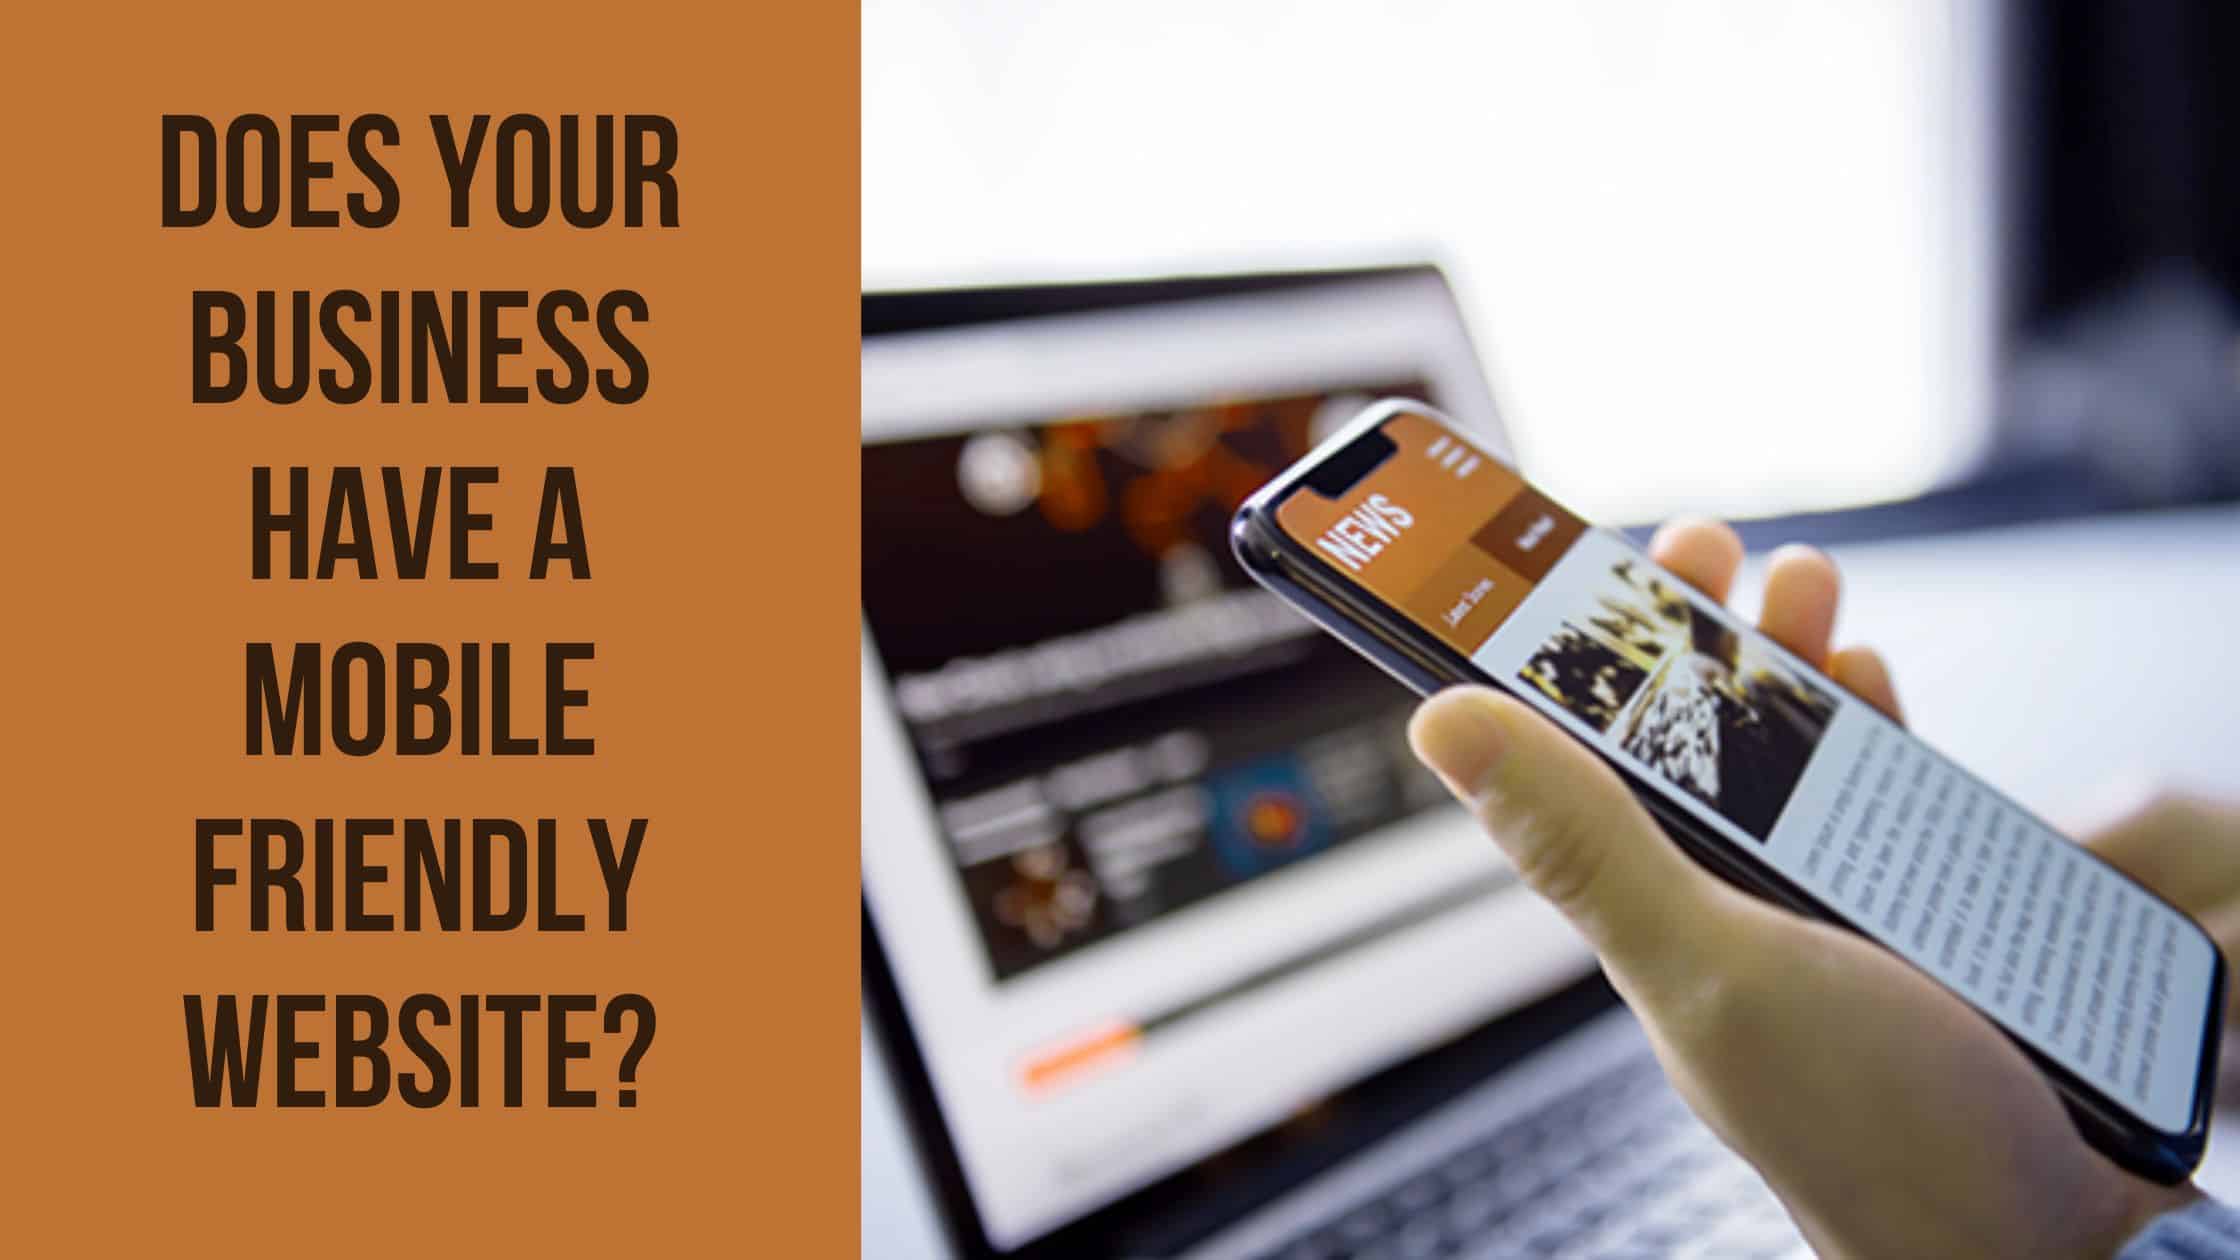 Does Your Business Have a Mobile Friendly Website?